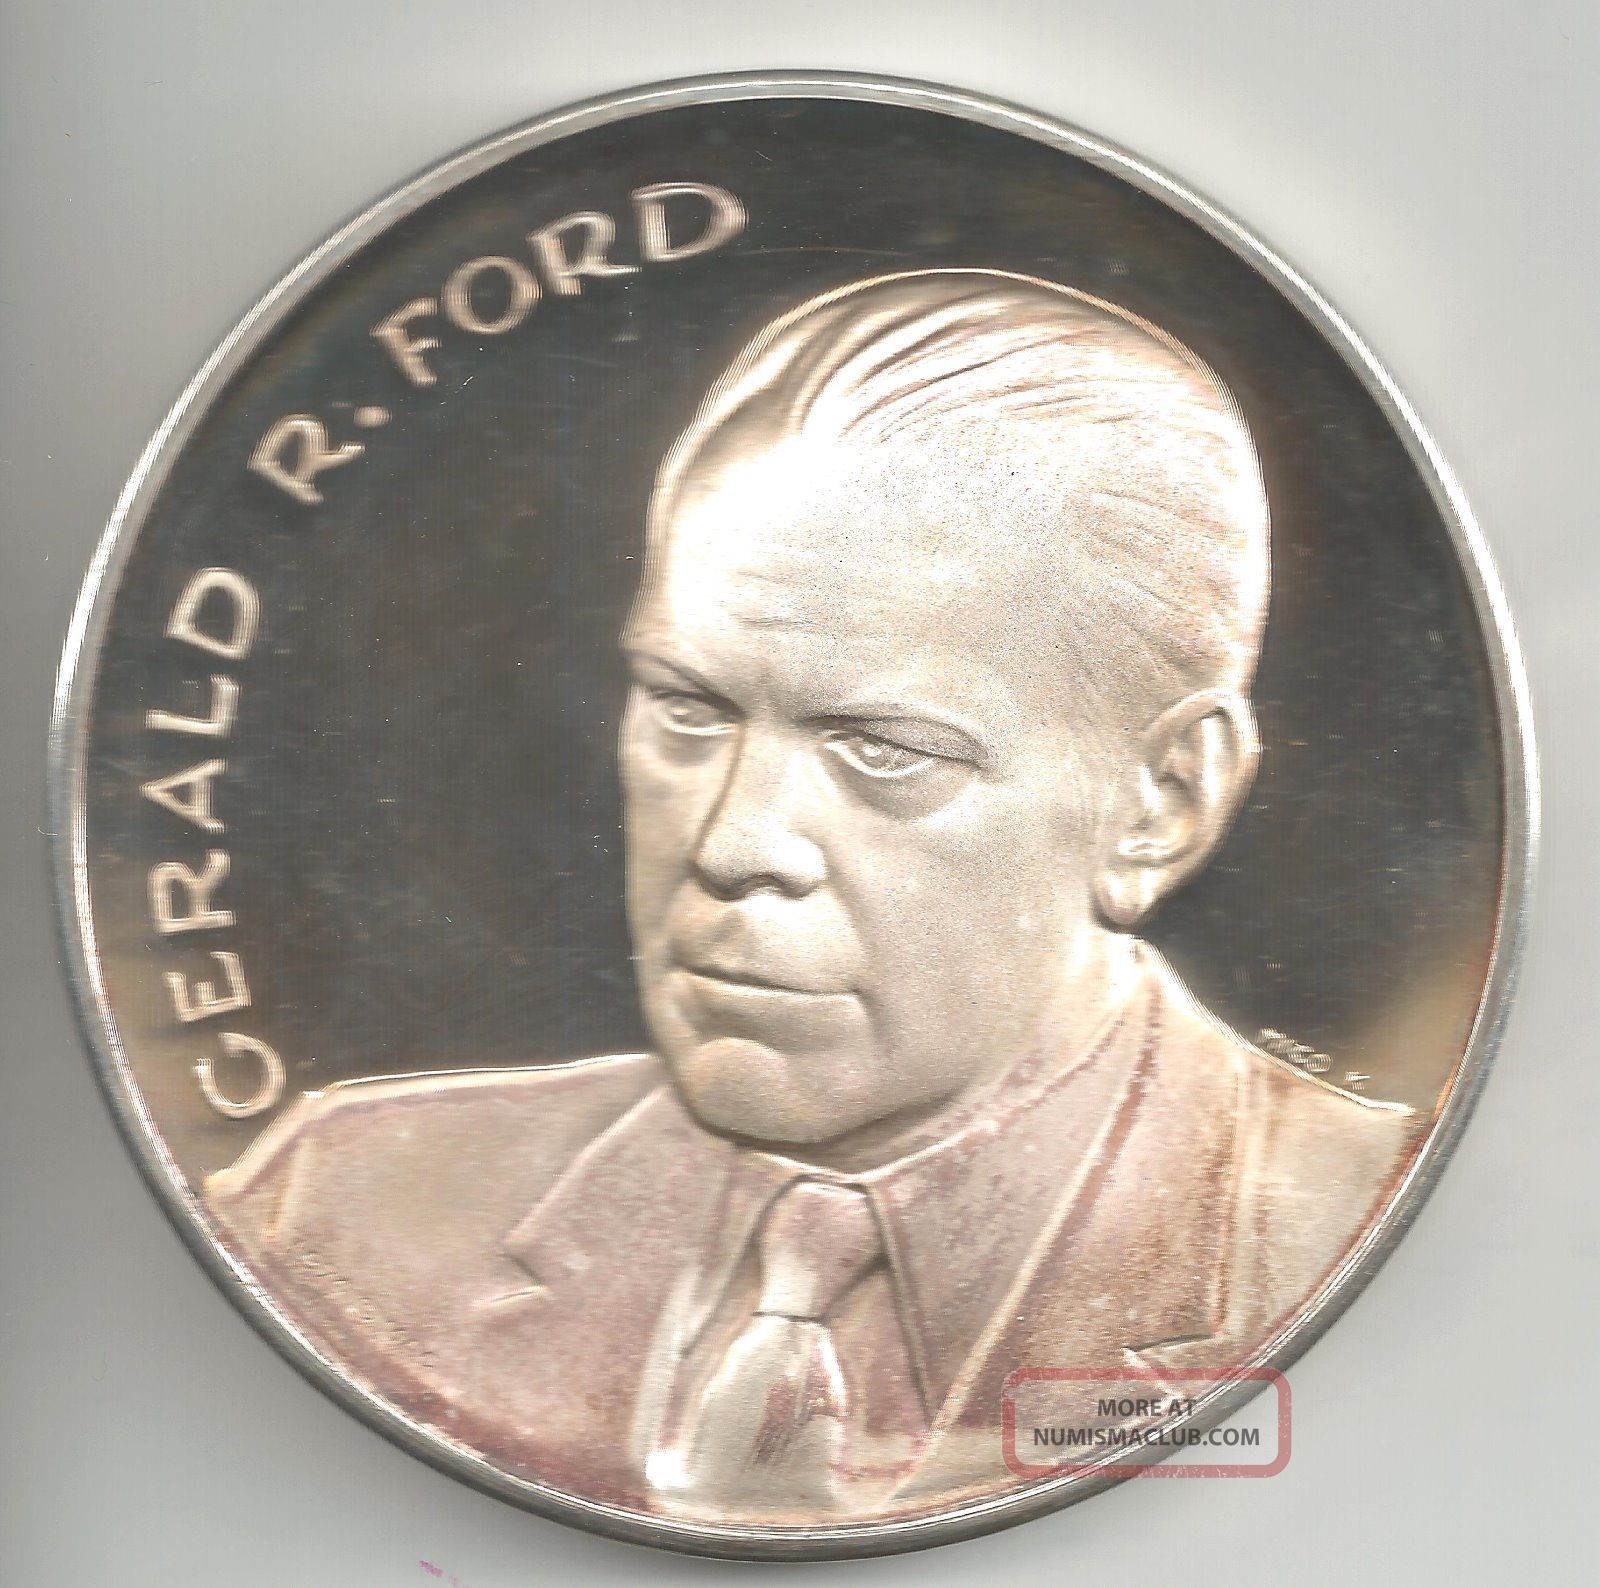 Gerald ford congressional medal #1